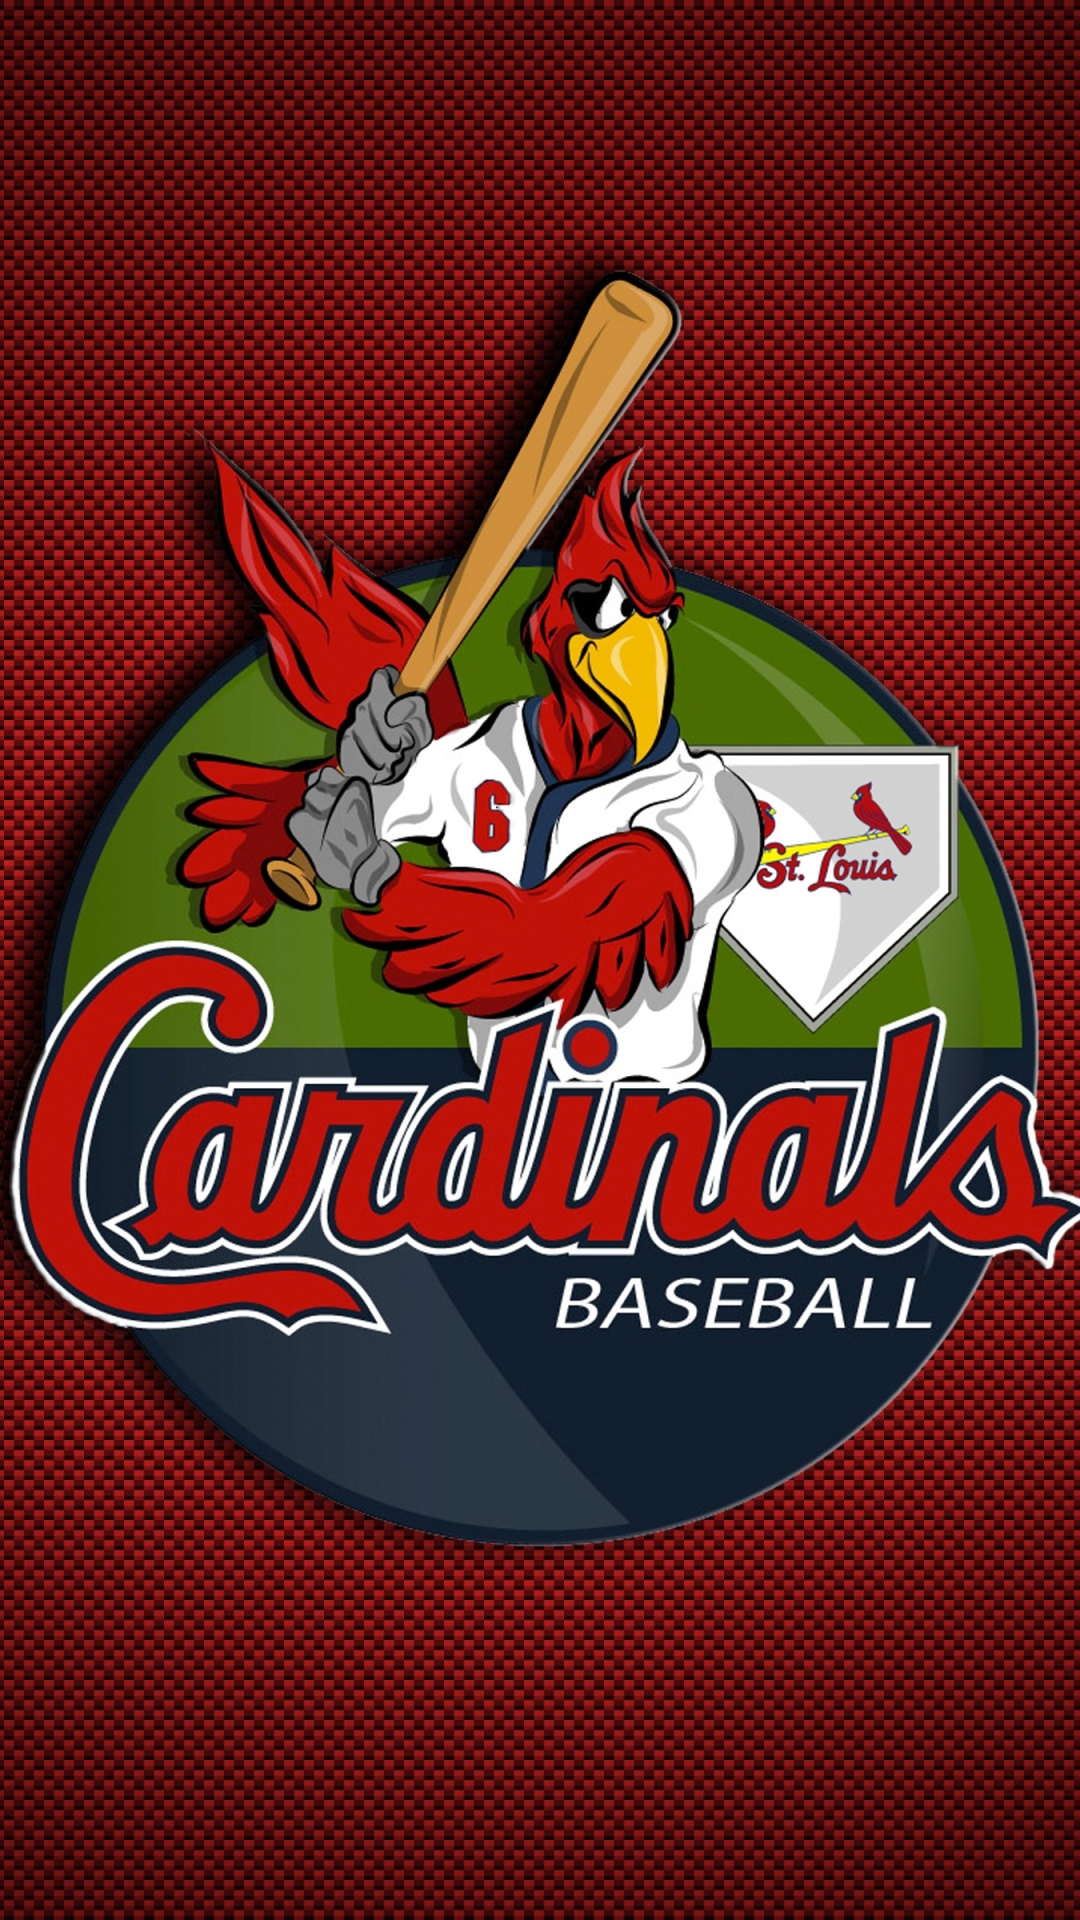 St Louis Cardinals wallpaper by JeremyNeal1 - Download on ZEDGE